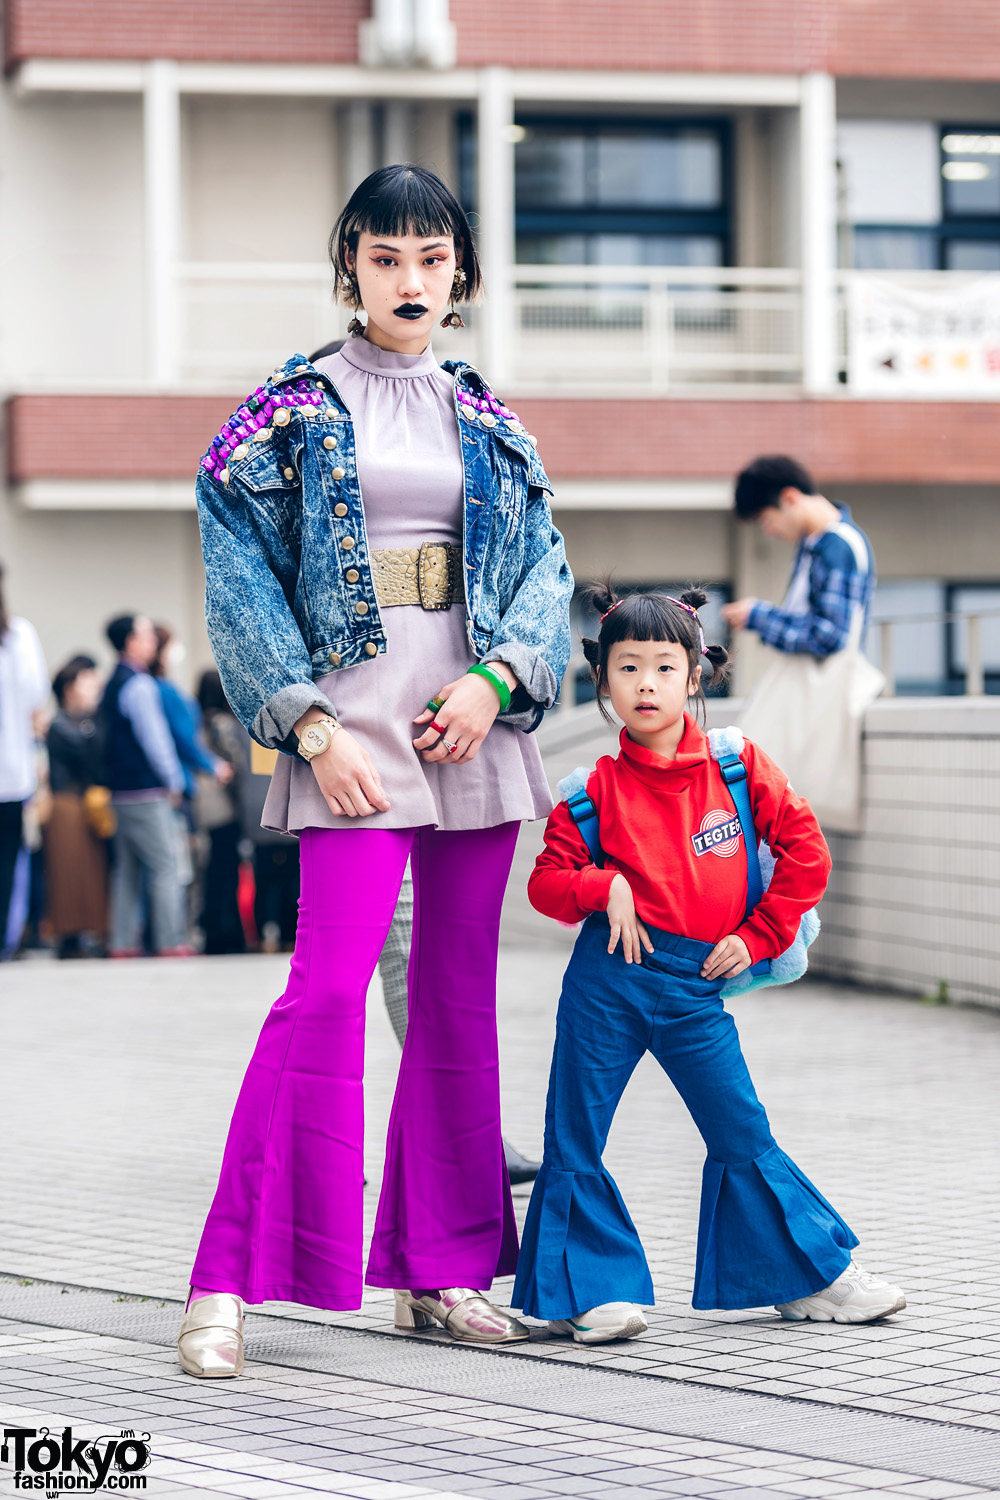 The Ivy Tokyo Mother & Daughter Street Styles w/ Floral Earrings, Vintage Studded Denim Jacket, TEGTEG Sweater, Flared Pants & Verdy x Puchu Monster Backpack